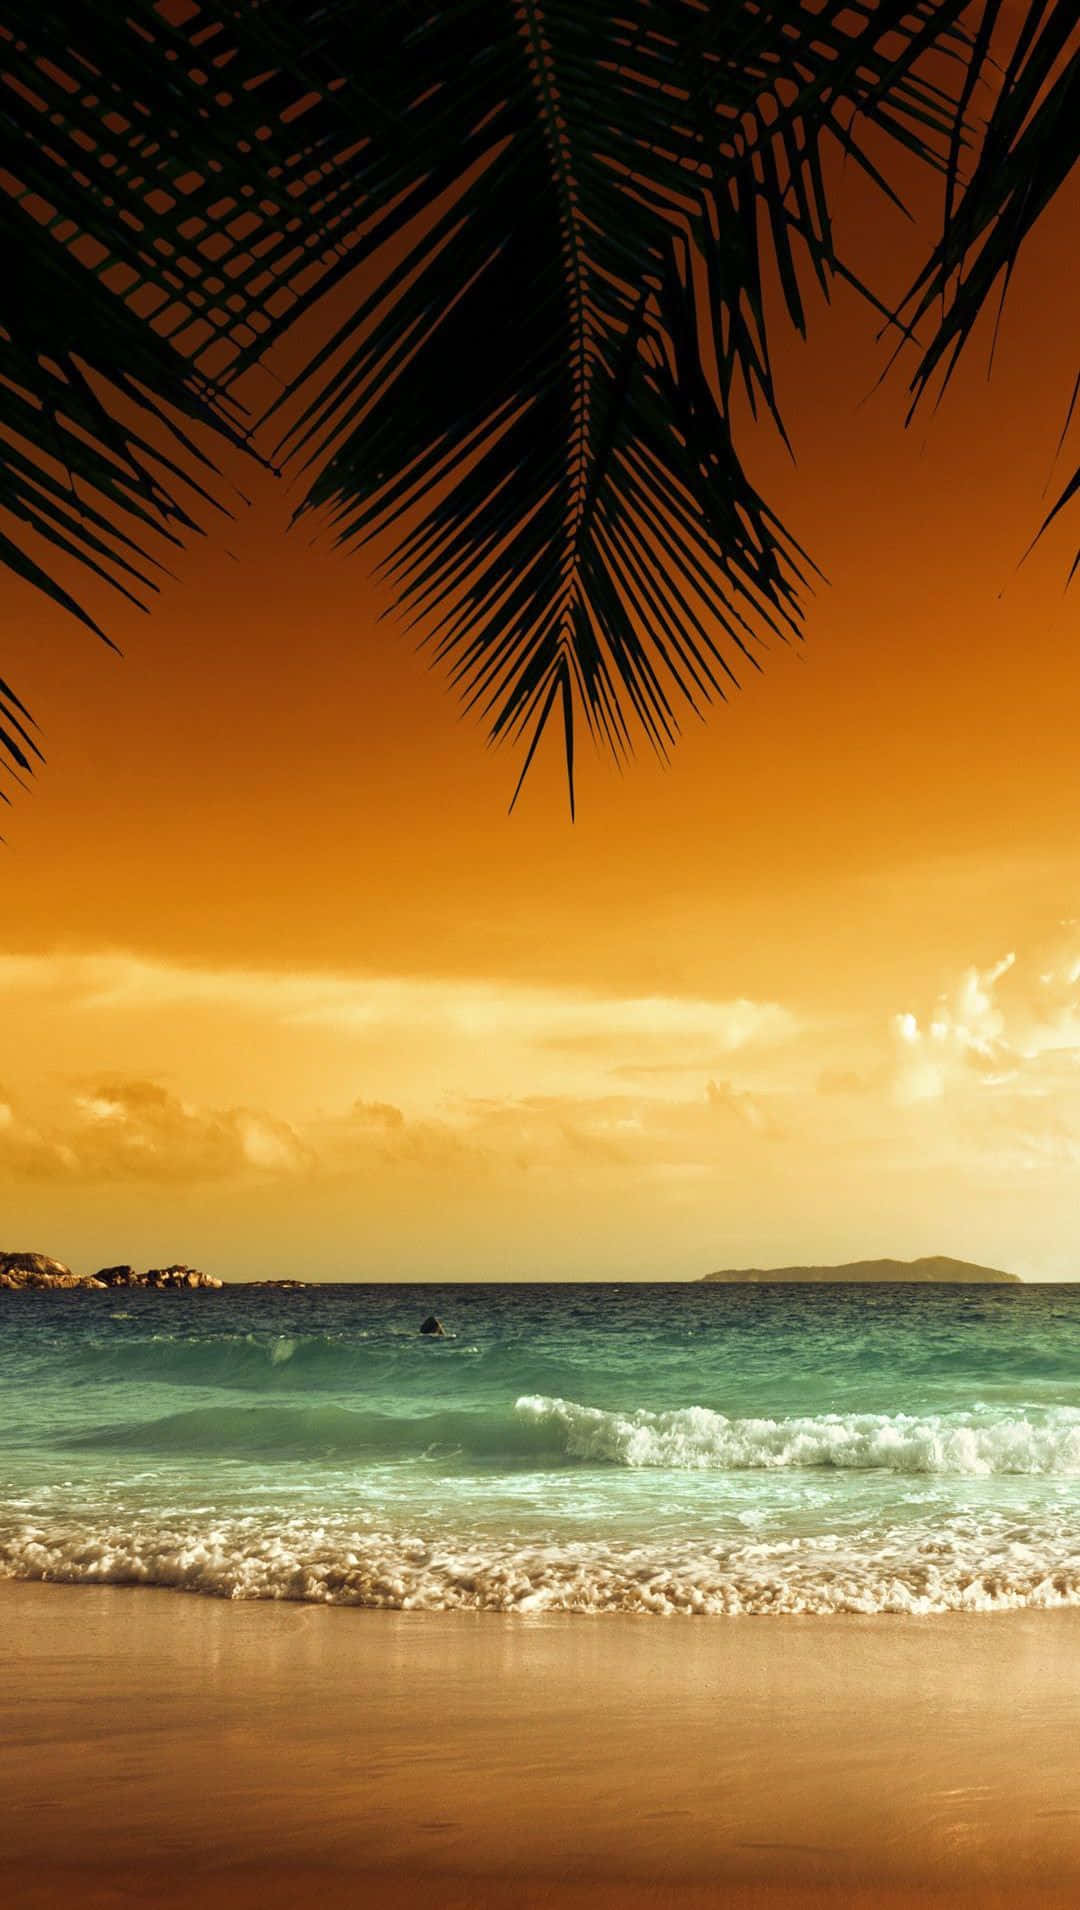 "Escape to the beach with your iPhone in-hand" Wallpaper